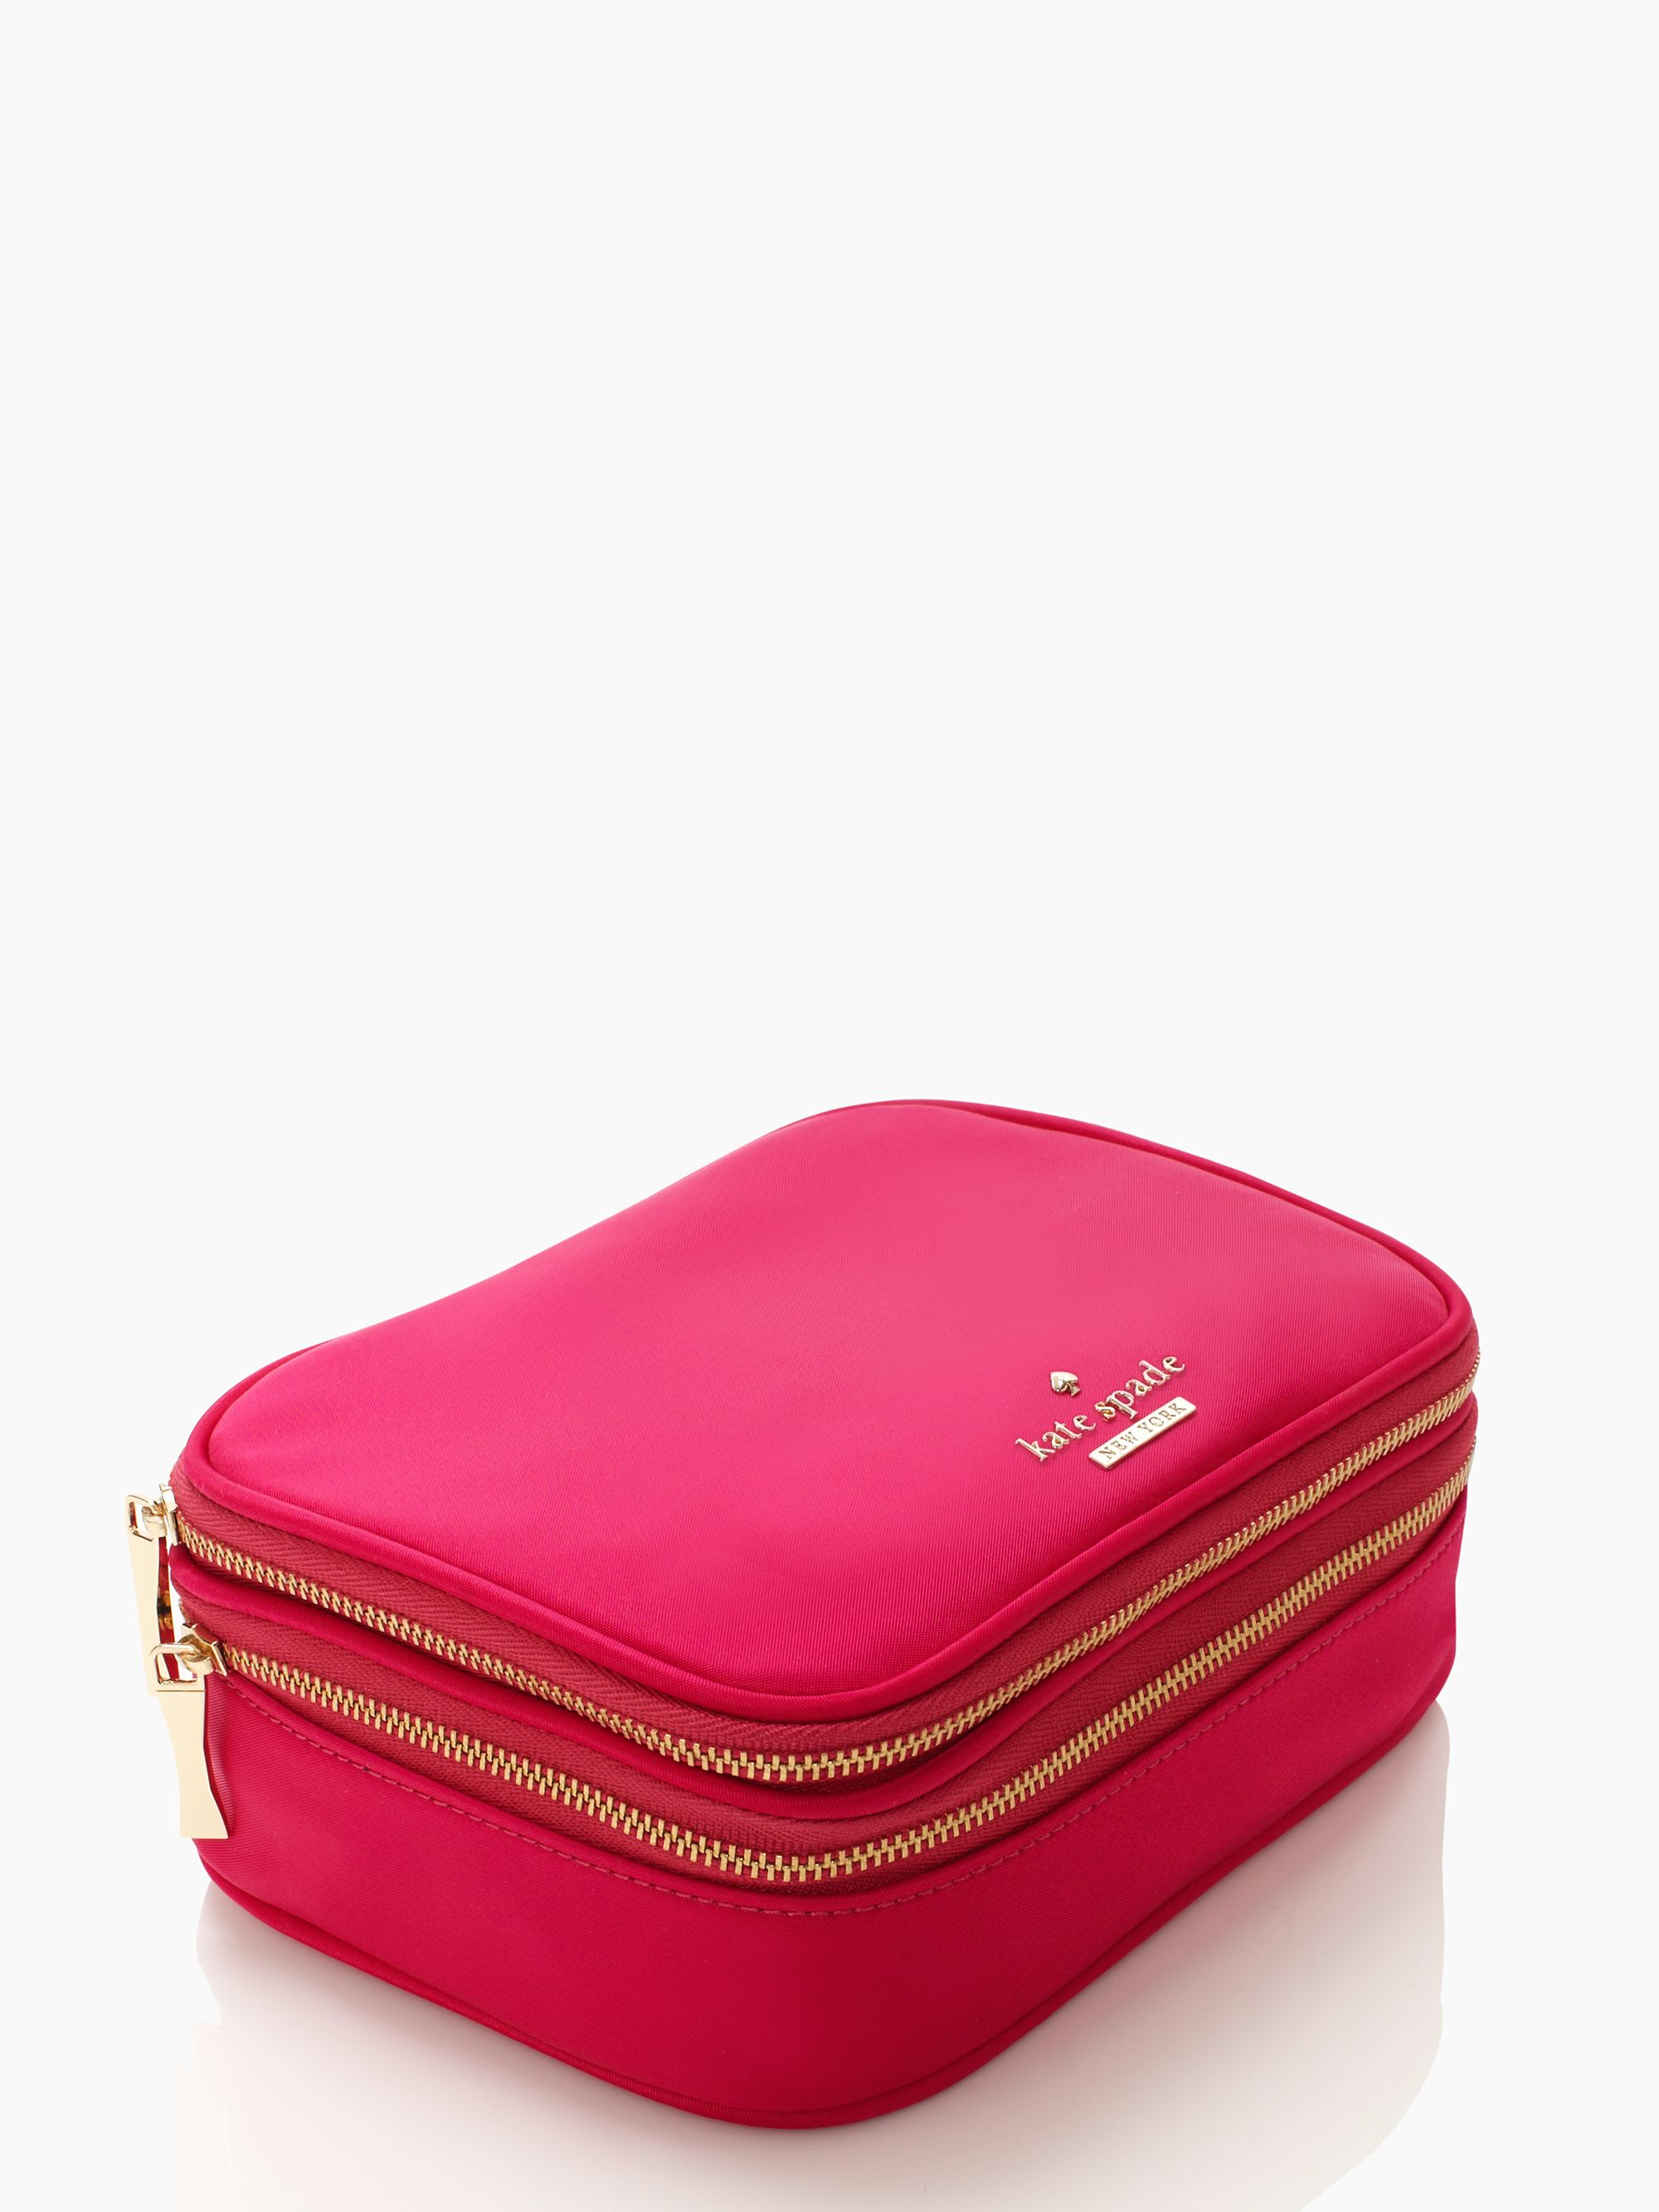 Kate Spade Classic Nylon Travel Jewelry Case in Pink Lyst